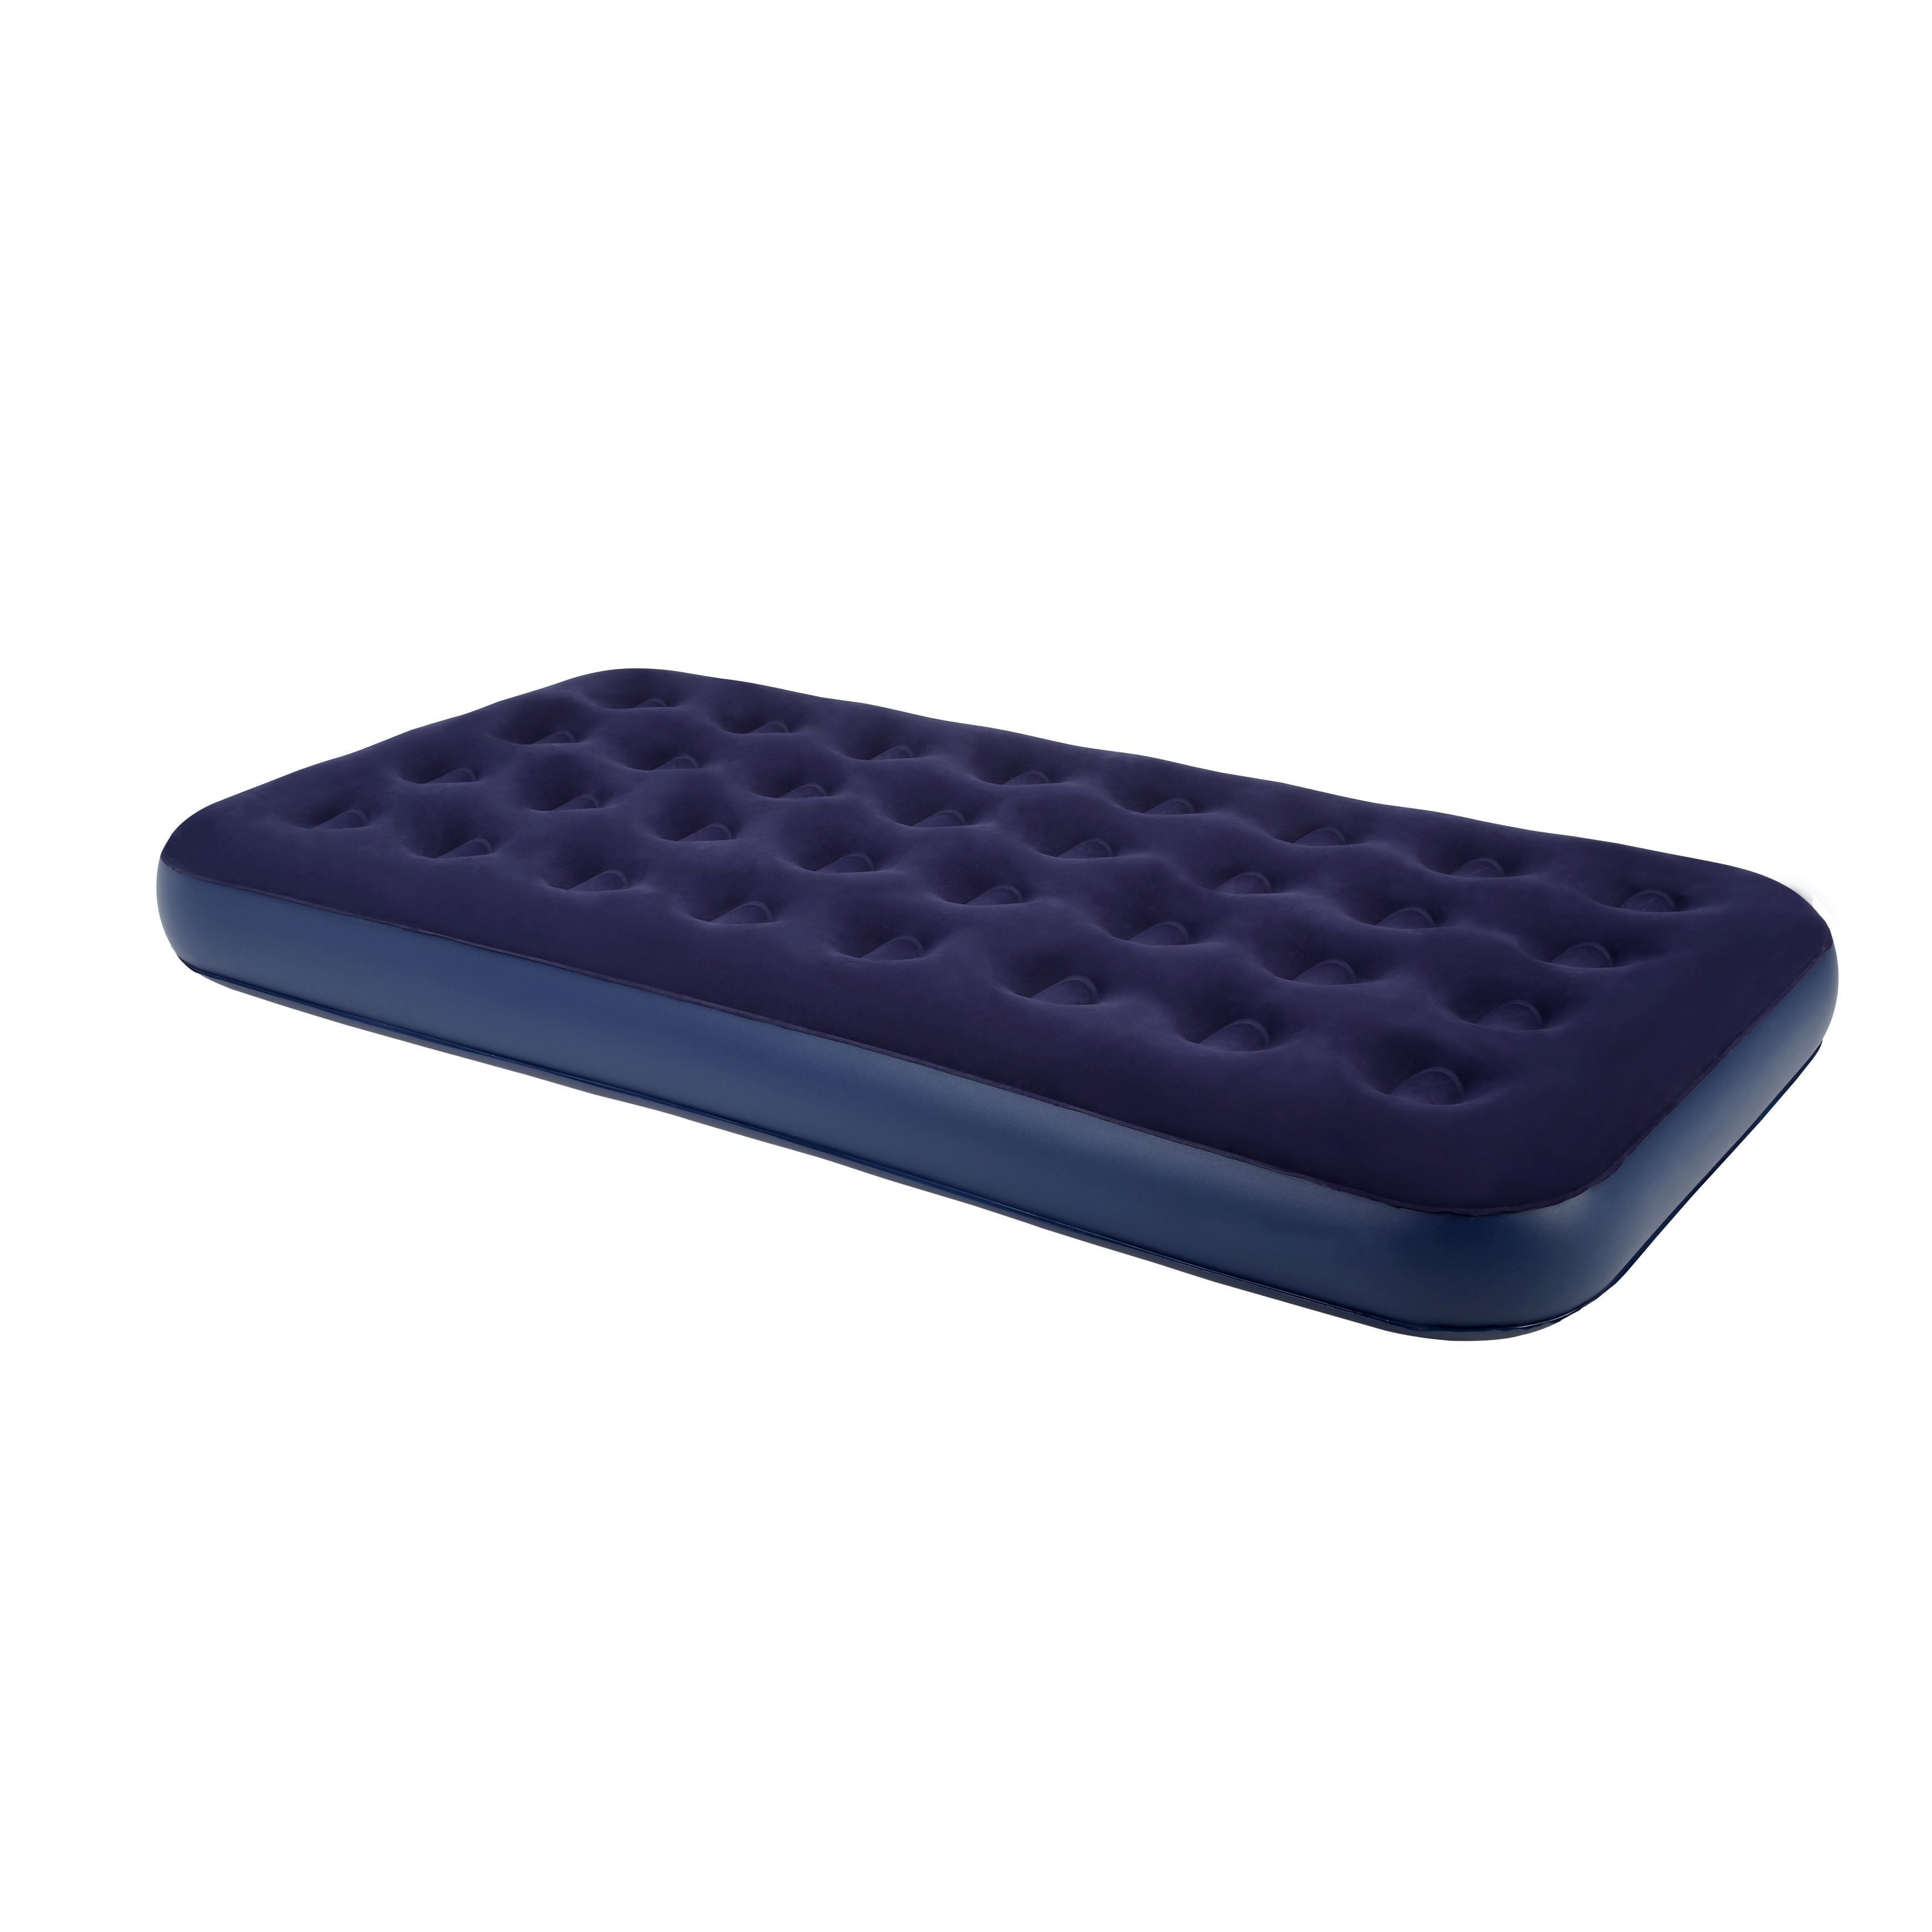 Second Avenue Collection Twin Size Air Mattress With Electric Air Pump F3e09d74 B144 4449 8579 487d9a04506e 